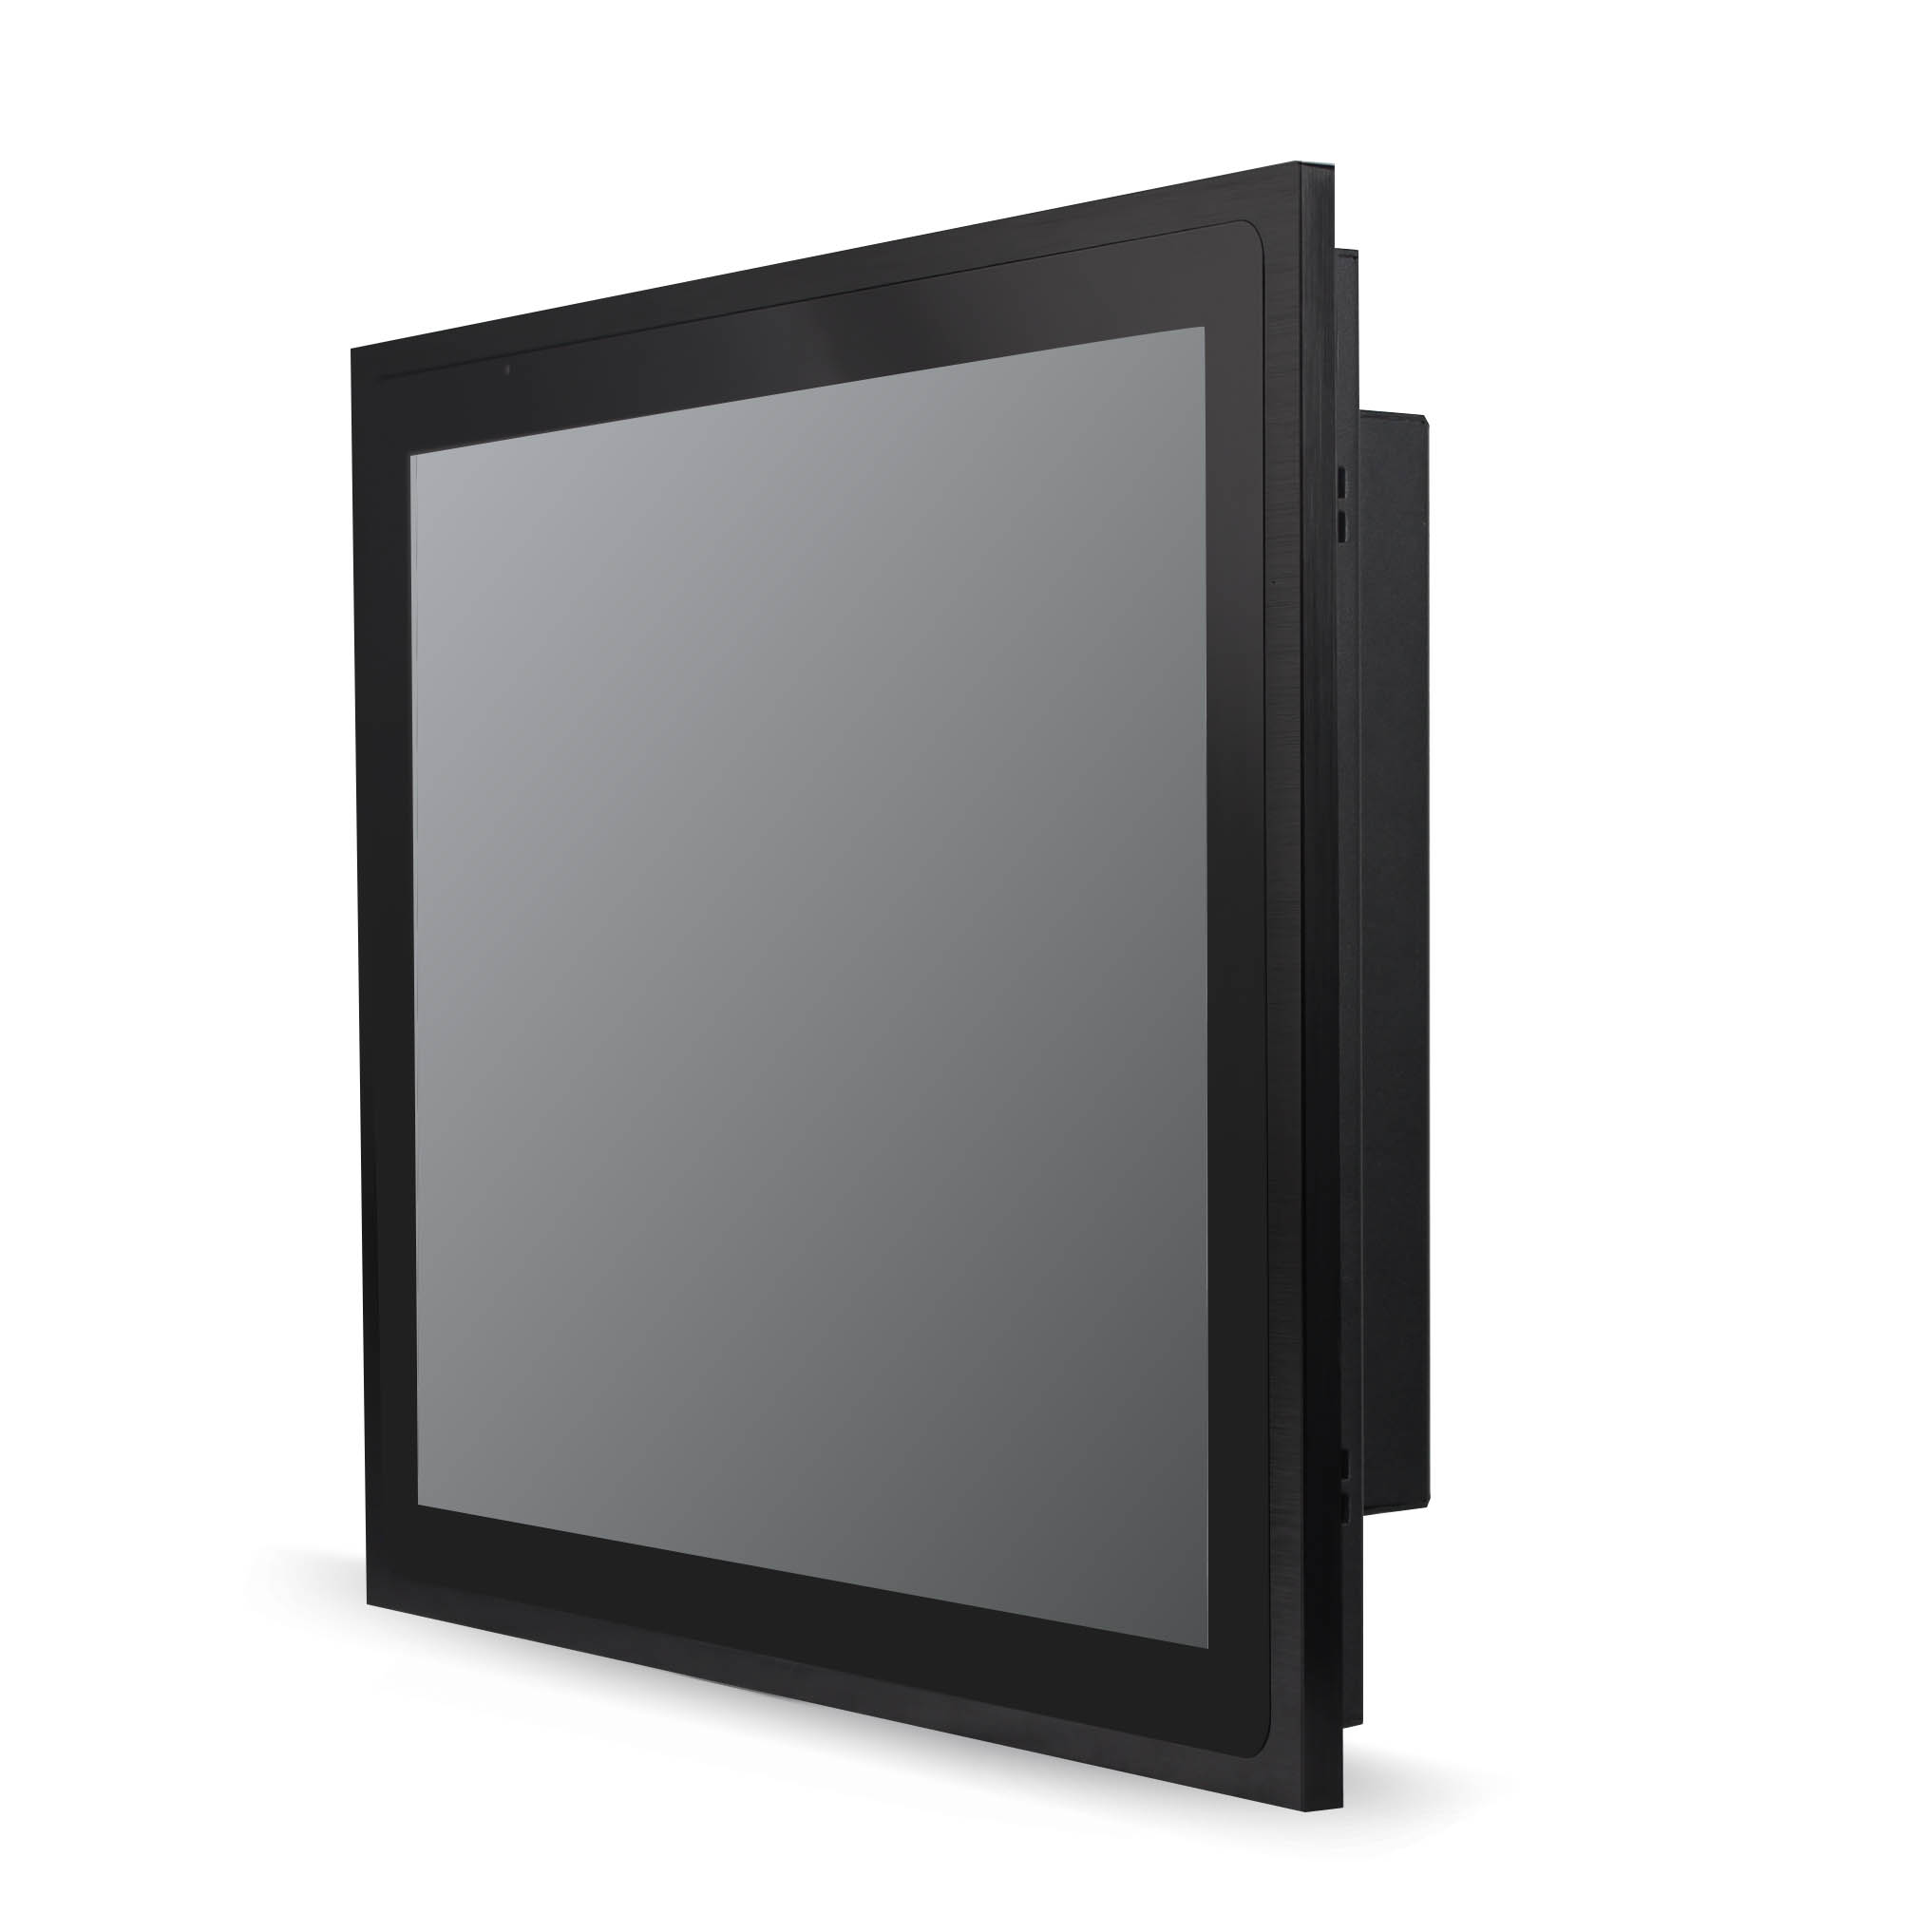 8 inch industrial panel PC